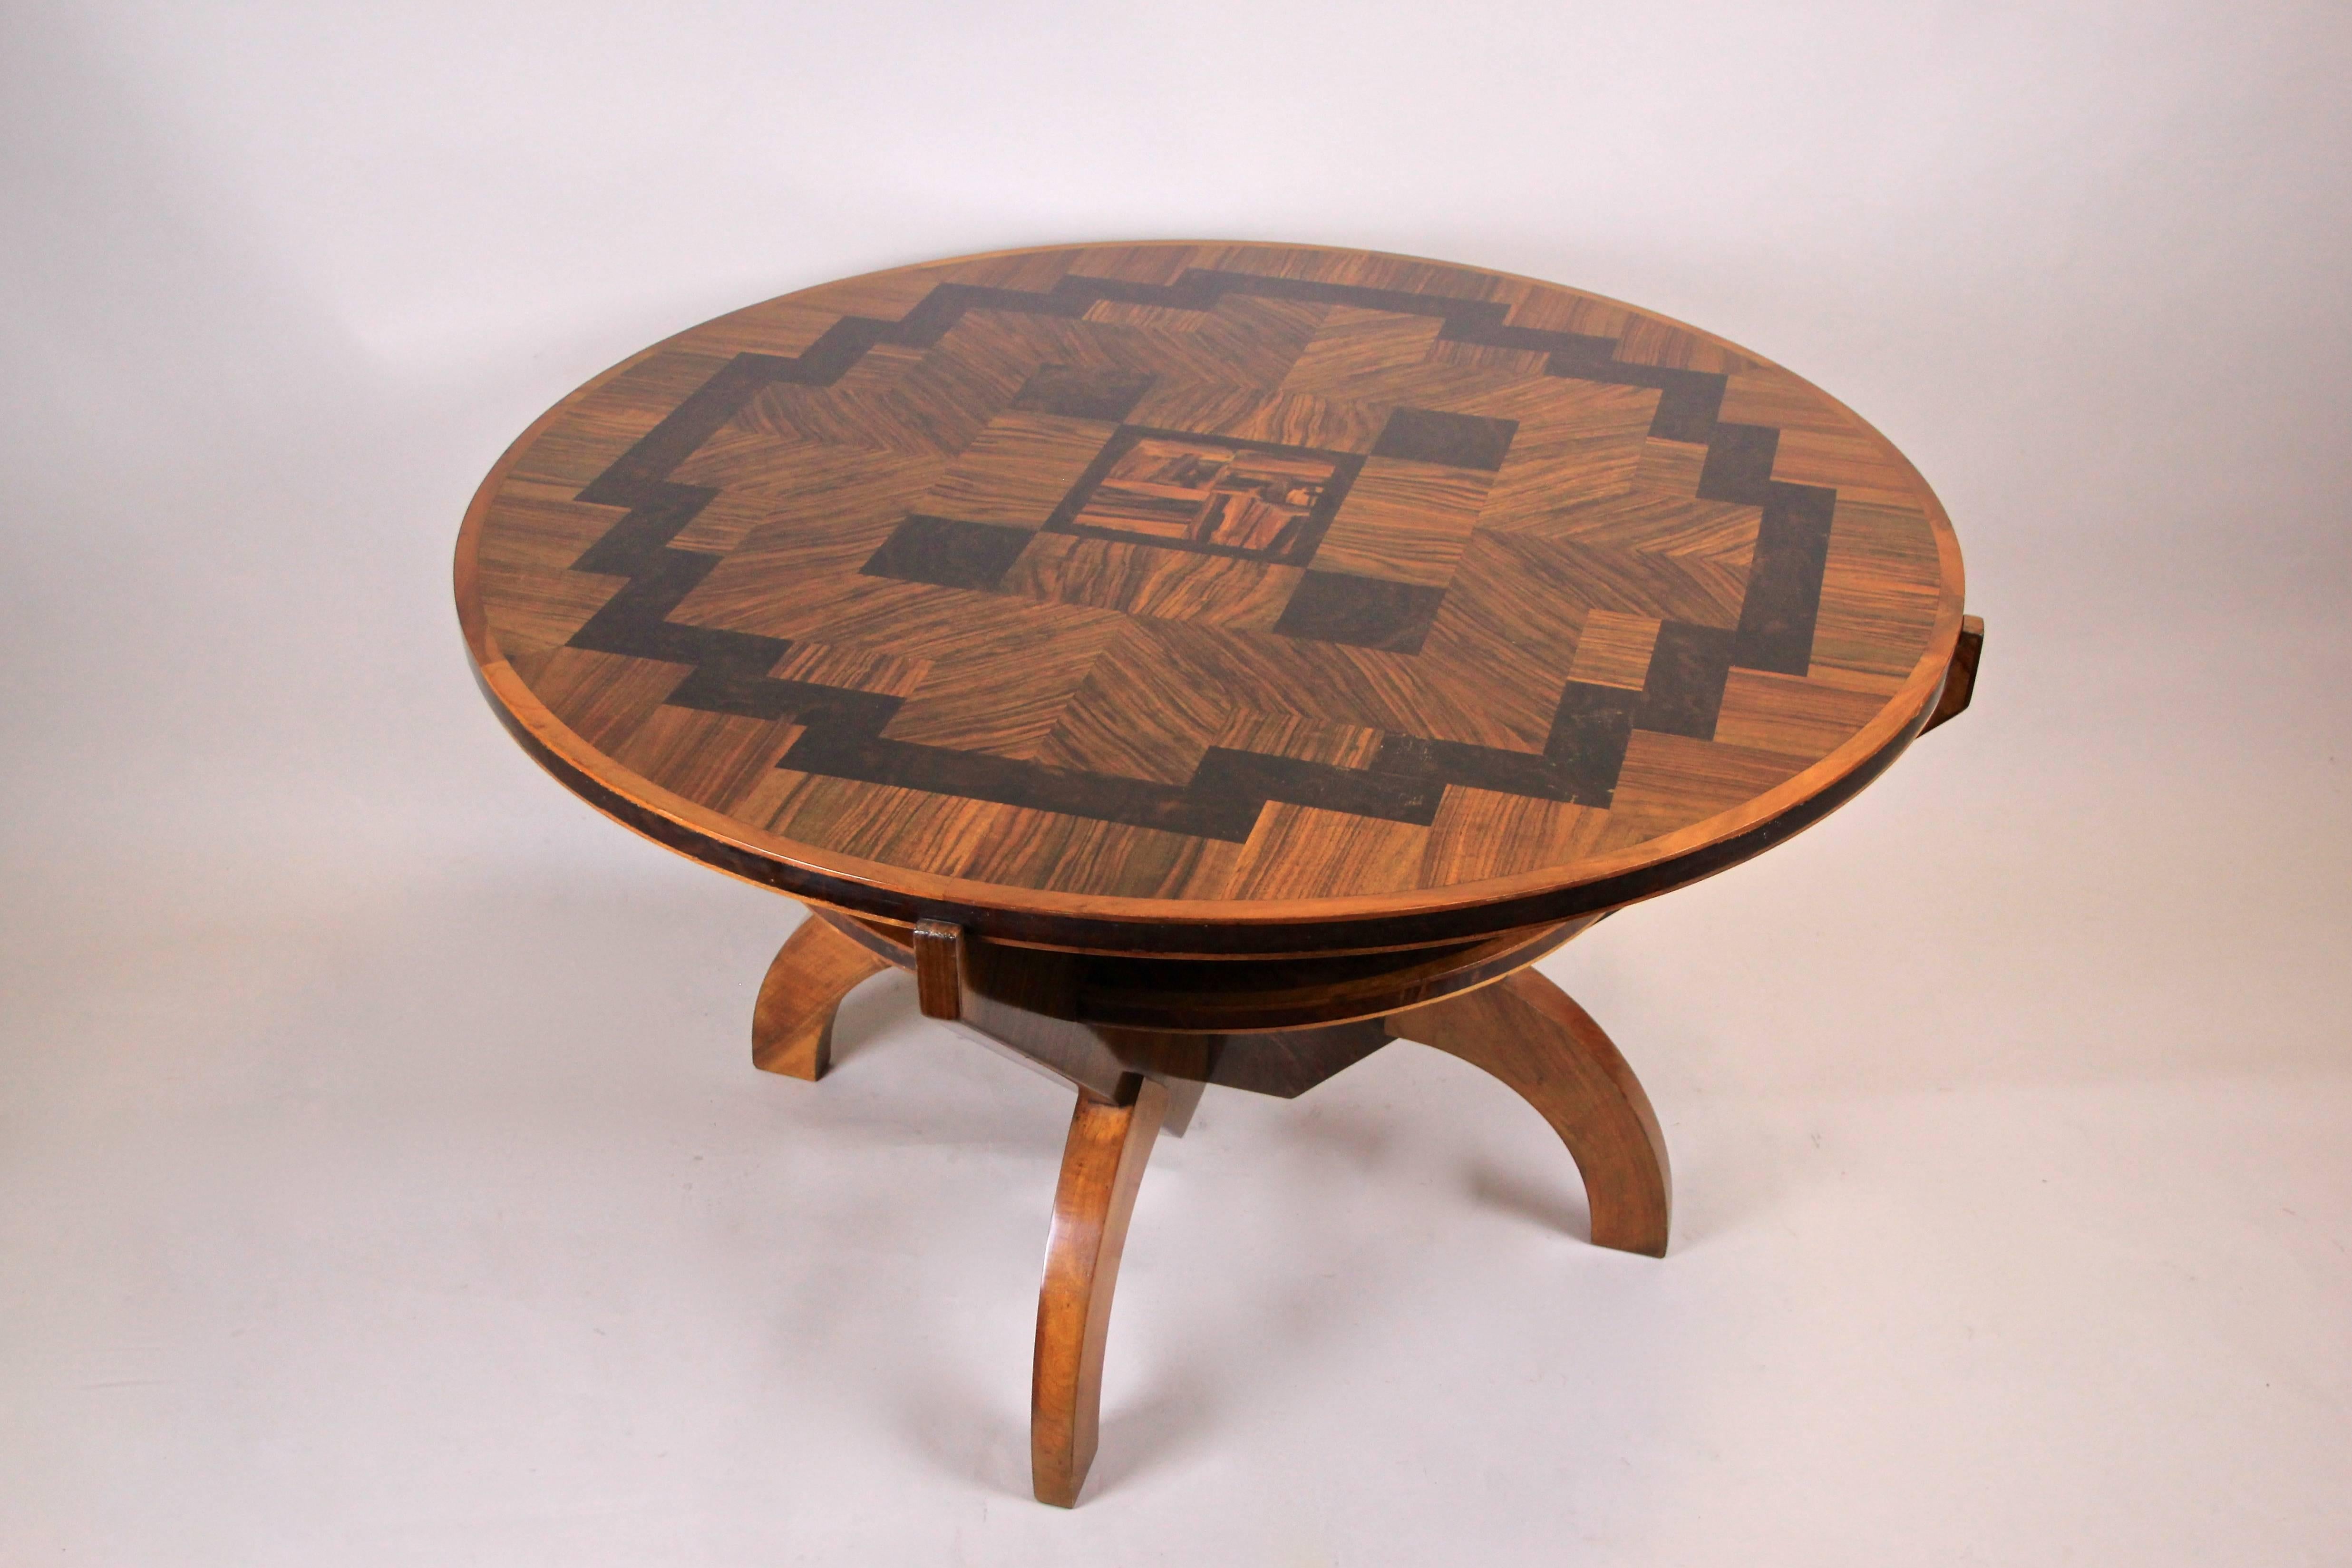 Exceptional round Art Deco table with marquetry work by Anton Herrgesell out of Vienna/ Austria from the era circa 1925. The unique designed table shows a great combination of different noble wood veneers. The round tabletop impresses with a